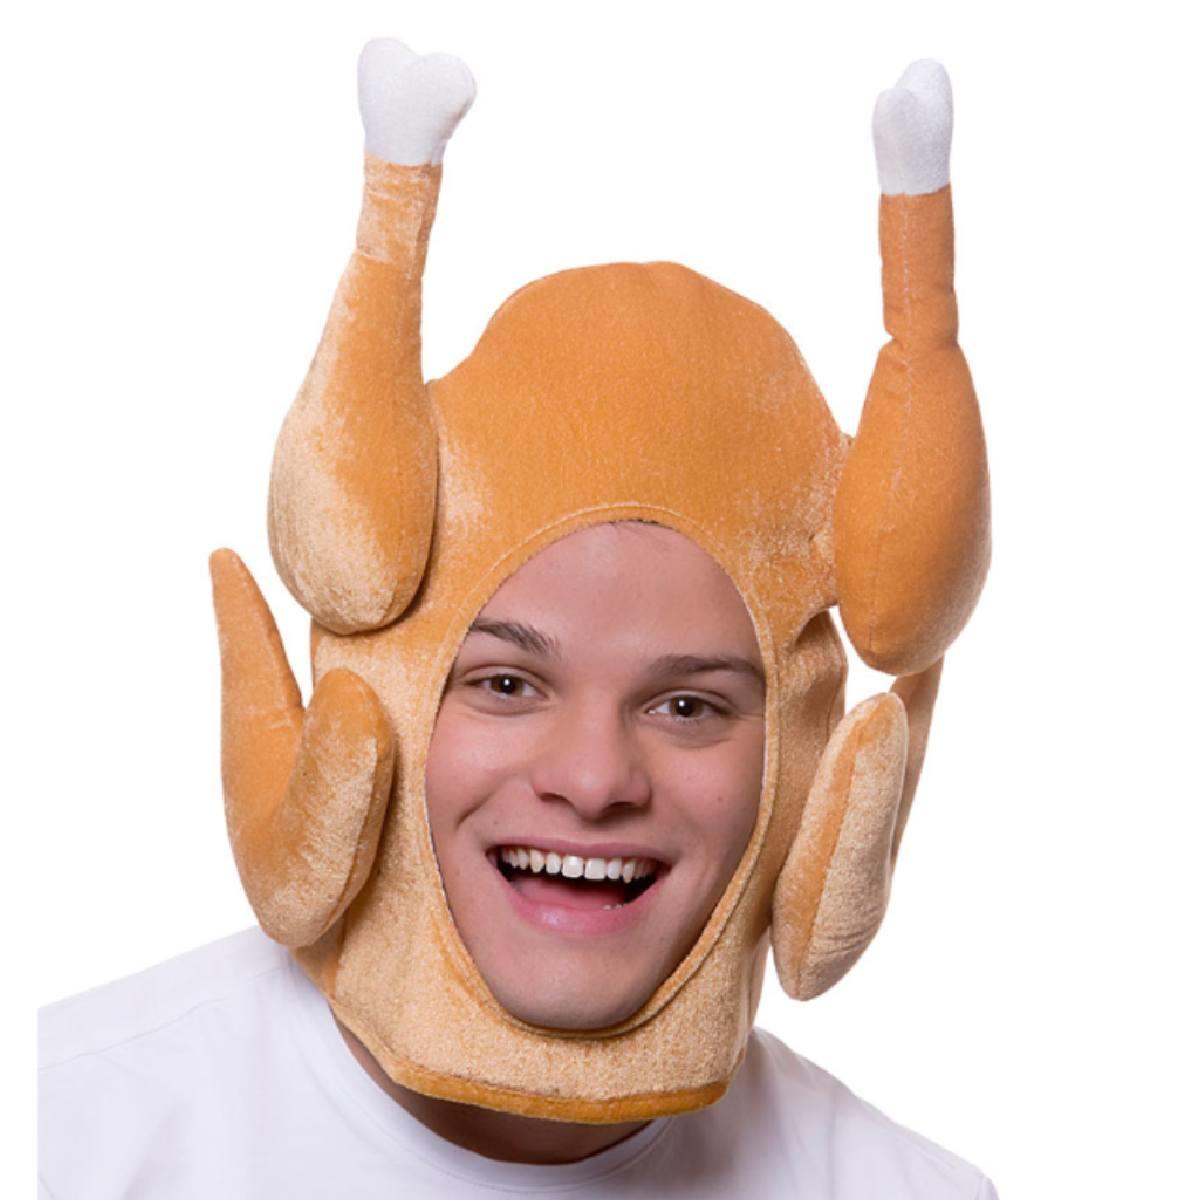 Adult's Novelty Open Faced Christmas Turkey Hat by Wicked XM-4683 available here at Karnival Costumes online Christmas party shop